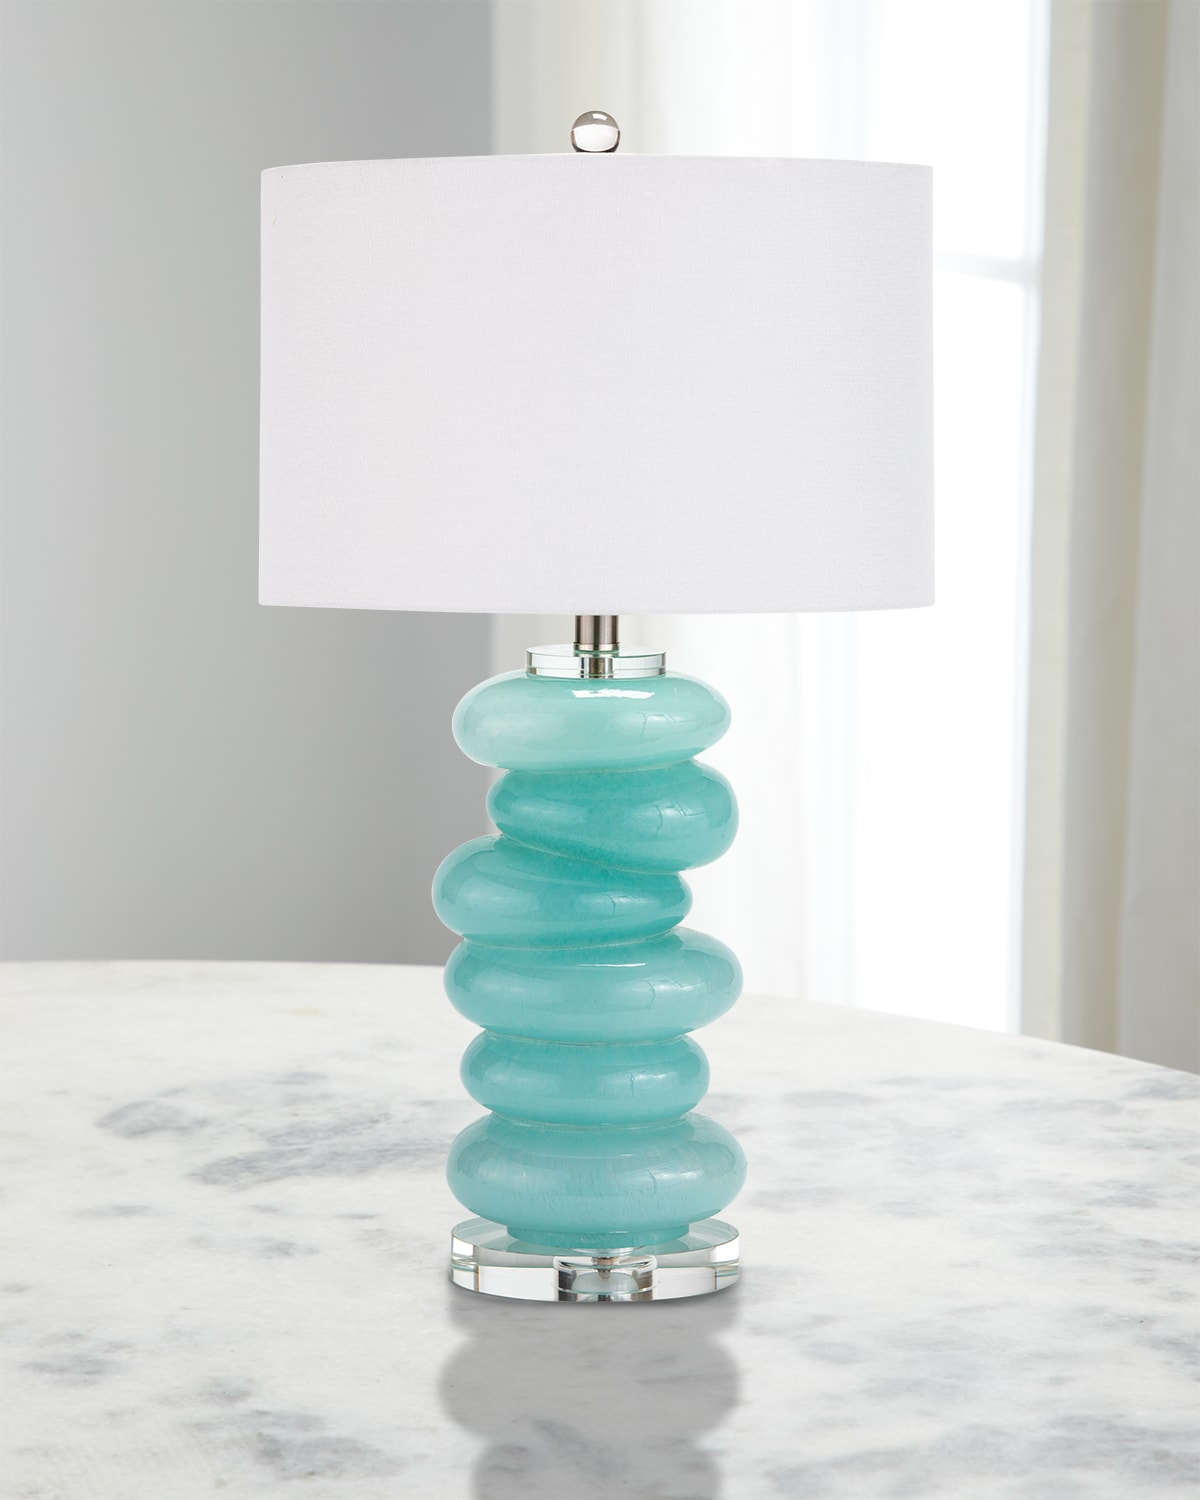 REGINA ANDREW STACKED PEBBLE GLASS TABLE LAMP